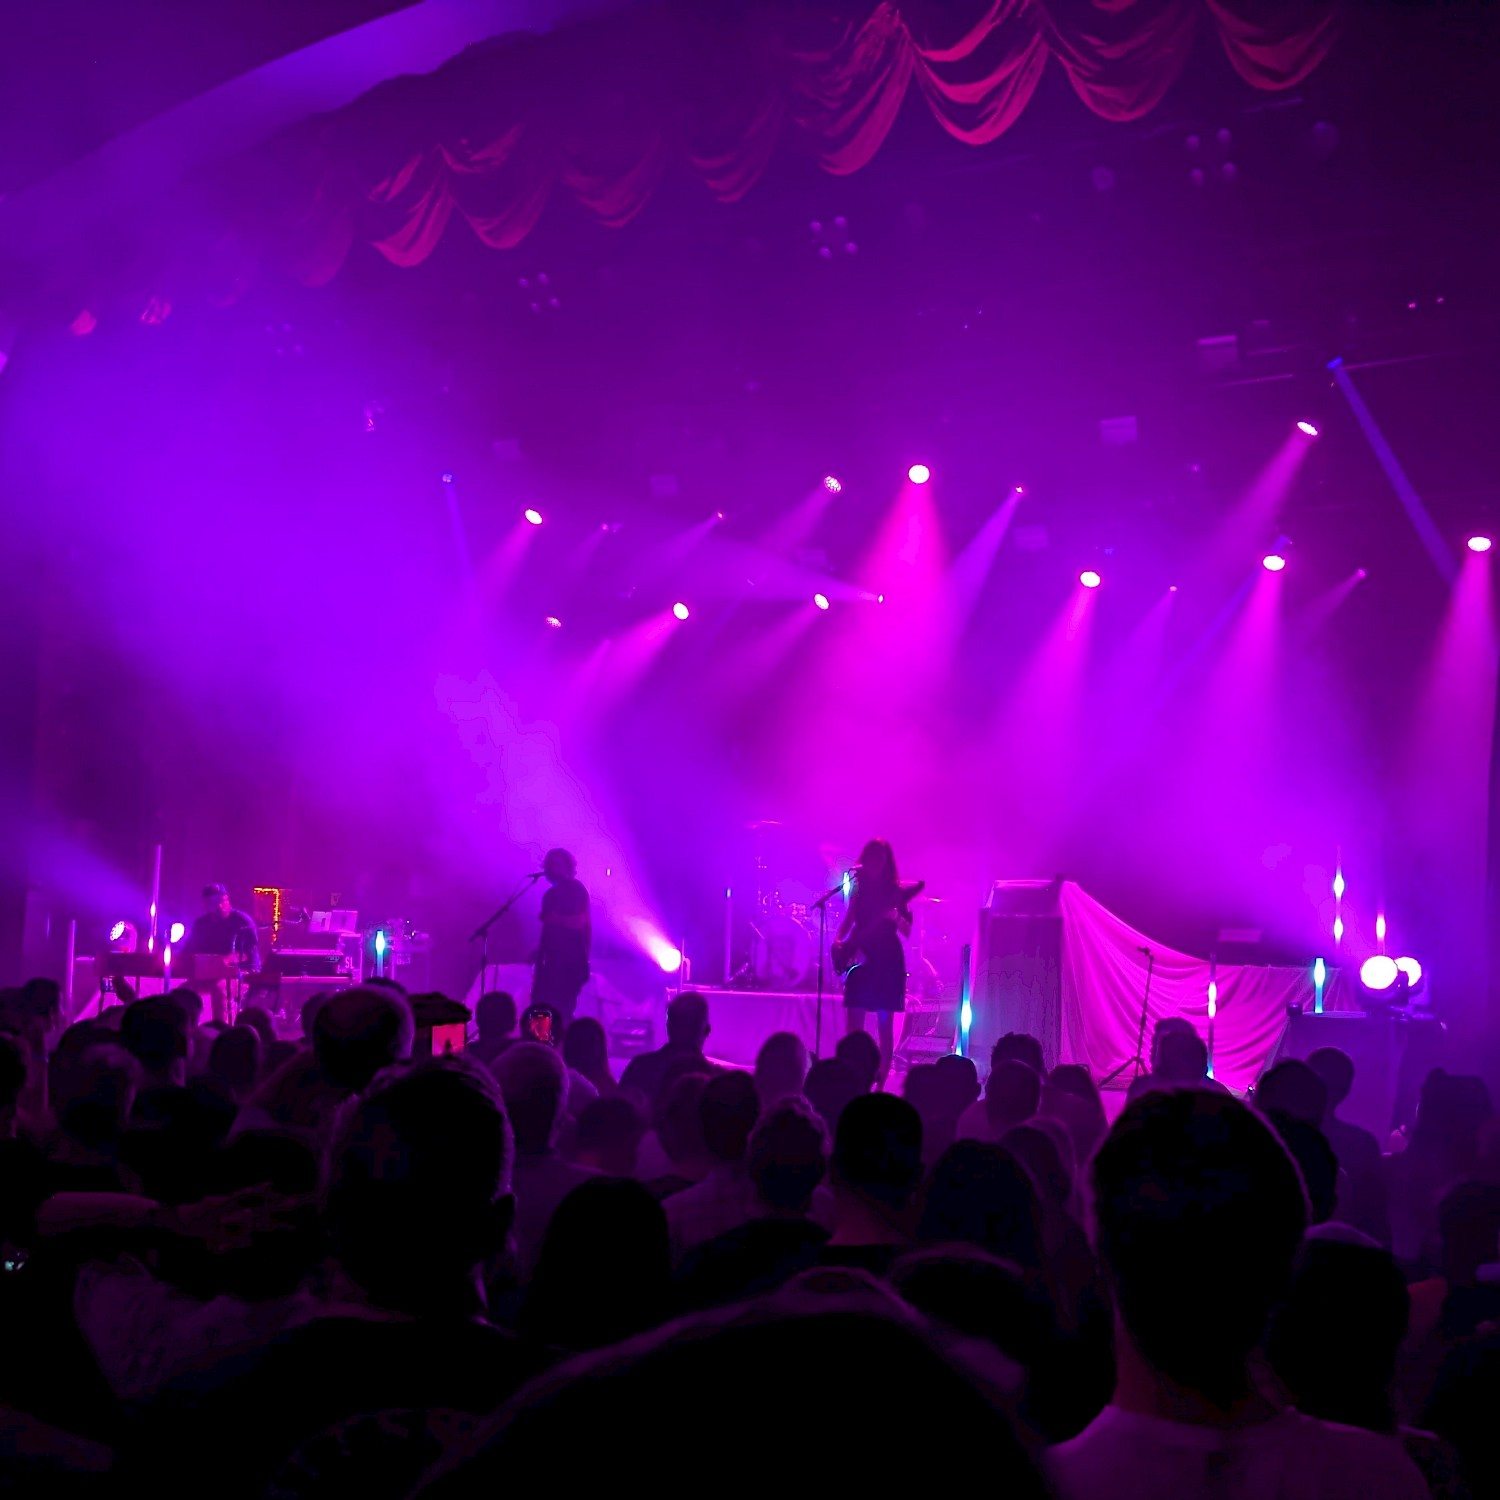 Silversun Pickups on stage with purpley-blue lighting